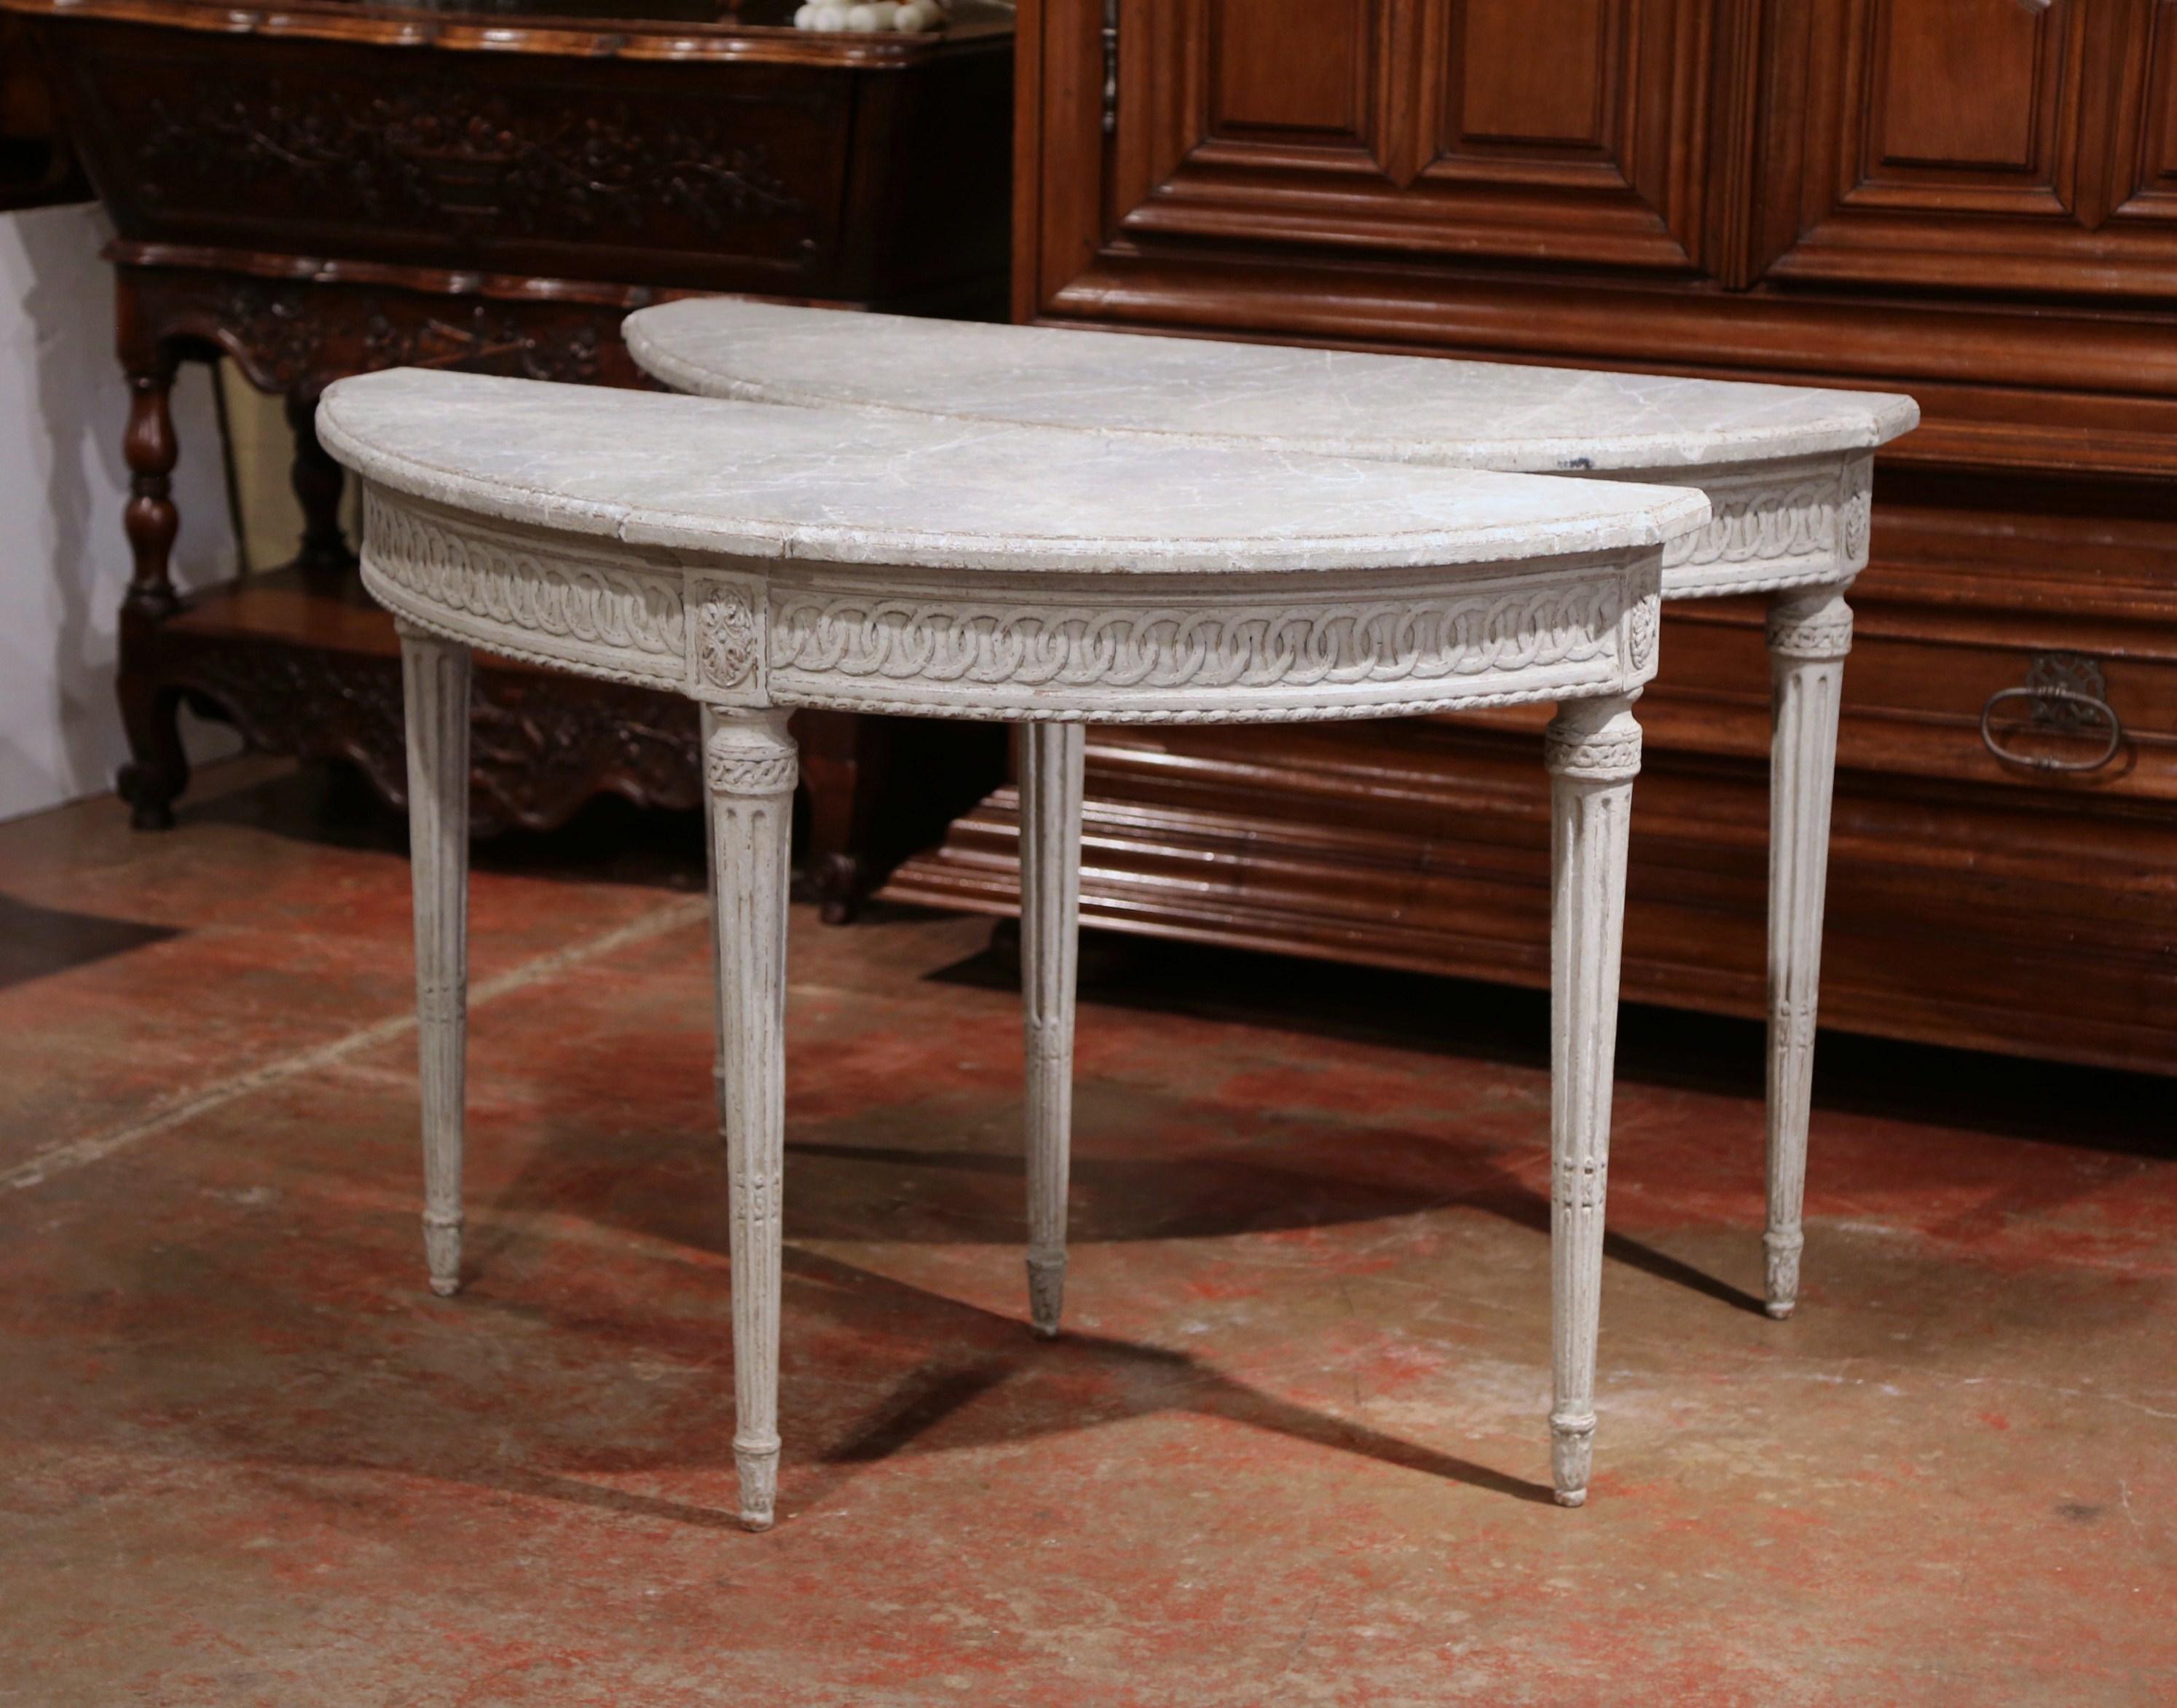 Decorate an entryway with this sophisticated pair of antique consoles. Crafted in northern France circa 1880 and shaped as half moon, each Louis XVI style table features three tapered and fluted legs, embellished with delicate carvings. The bombe